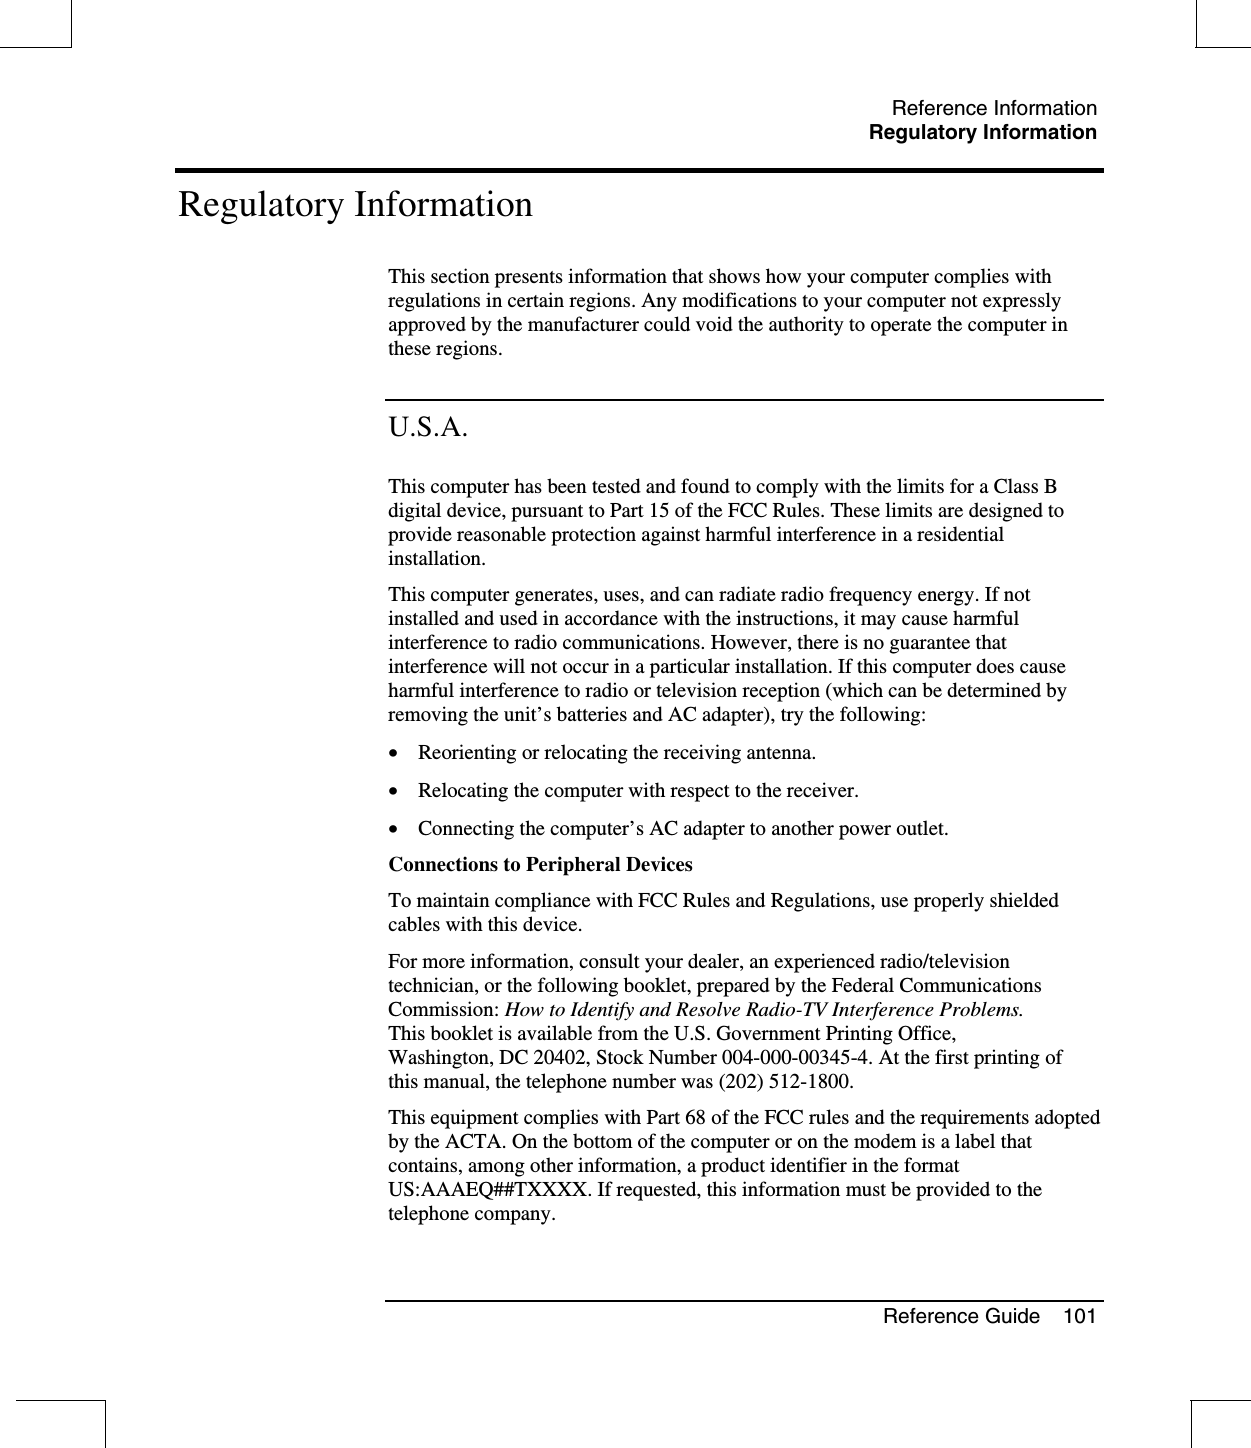 Reference InformationRegulatory InformationReference Guide 101Regulatory InformationThis section presents information that shows how your computer complies withregulations in certain regions. Any modifications to your computer not expresslyapproved by the manufacturer could void the authority to operate the computer inthese regions.U.S.A.This computer has been tested and found to comply with the limits for a Class Bdigital device, pursuant to Part 15 of the FCC Rules. These limits are designed toprovide reasonable protection against harmful interference in a residentialinstallation.This computer generates, uses, and can radiate radio frequency energy. If notinstalled and used in accordance with the instructions, it may cause harmfulinterference to radio communications. However, there is no guarantee thatinterference will not occur in a particular installation. If this computer does causeharmful interference to radio or television reception (which can be determined byremoving the unit’s batteries and AC adapter), try the following:•  Reorienting or relocating the receiving antenna.•  Relocating the computer with respect to the receiver.•  Connecting the computer’s AC adapter to another power outlet.Connections to Peripheral DevicesTo maintain compliance with FCC Rules and Regulations, use properly shieldedcables with this device.For more information, consult your dealer, an experienced radio/televisiontechnician, or the following booklet, prepared by the Federal CommunicationsCommission: How to Identify and Resolve Radio-TV Interference Problems.This booklet is available from the U.S. Government Printing Office,Washington, DC 20402, Stock Number 004-000-00345-4. At the first printing ofthis manual, the telephone number was (202) 512-1800.This equipment complies with Part 68 of the FCC rules and the requirements adoptedby the ACTA. On the bottom of the computer or on the modem is a label thatcontains, among other information, a product identifier in the formatUS:AAAEQ##TXXXX. If requested, this information must be provided to thetelephone company.